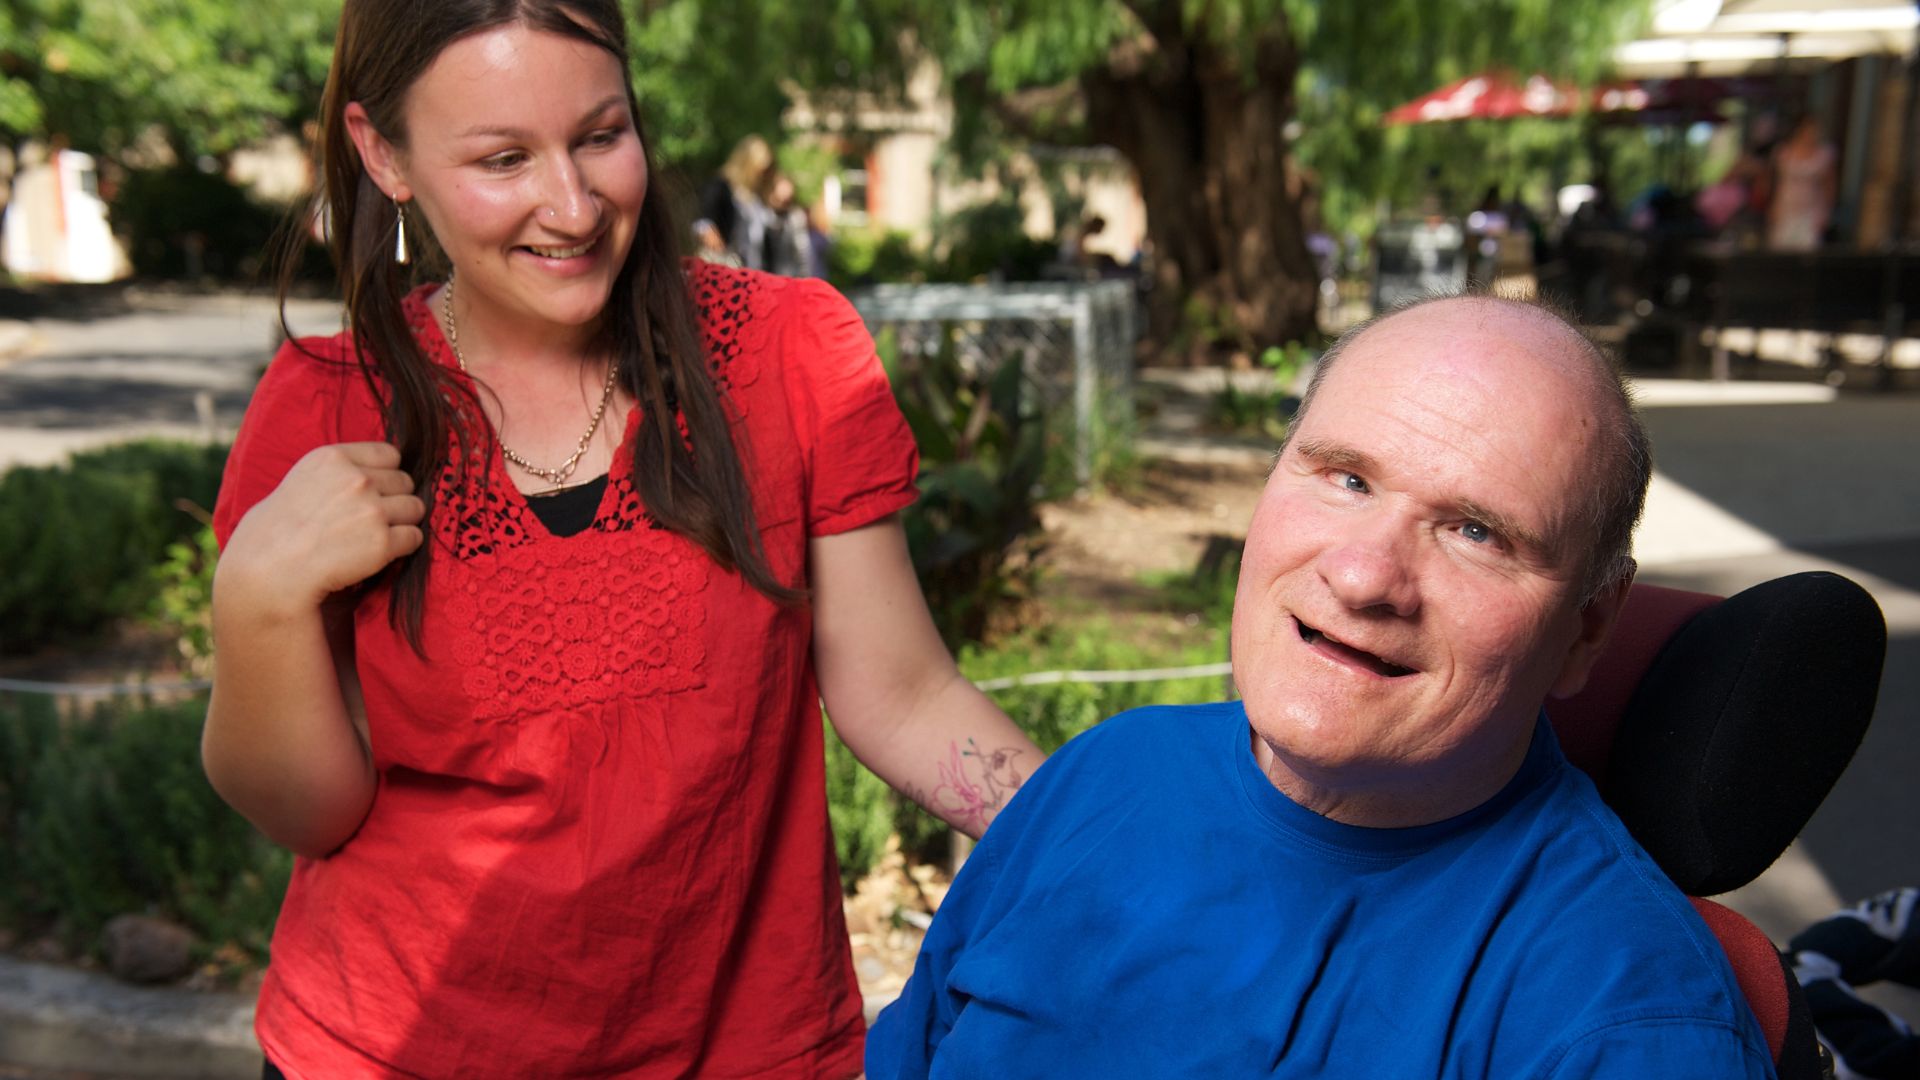 A lady in a red dress supporting a man in a wheelchair through independent living options.